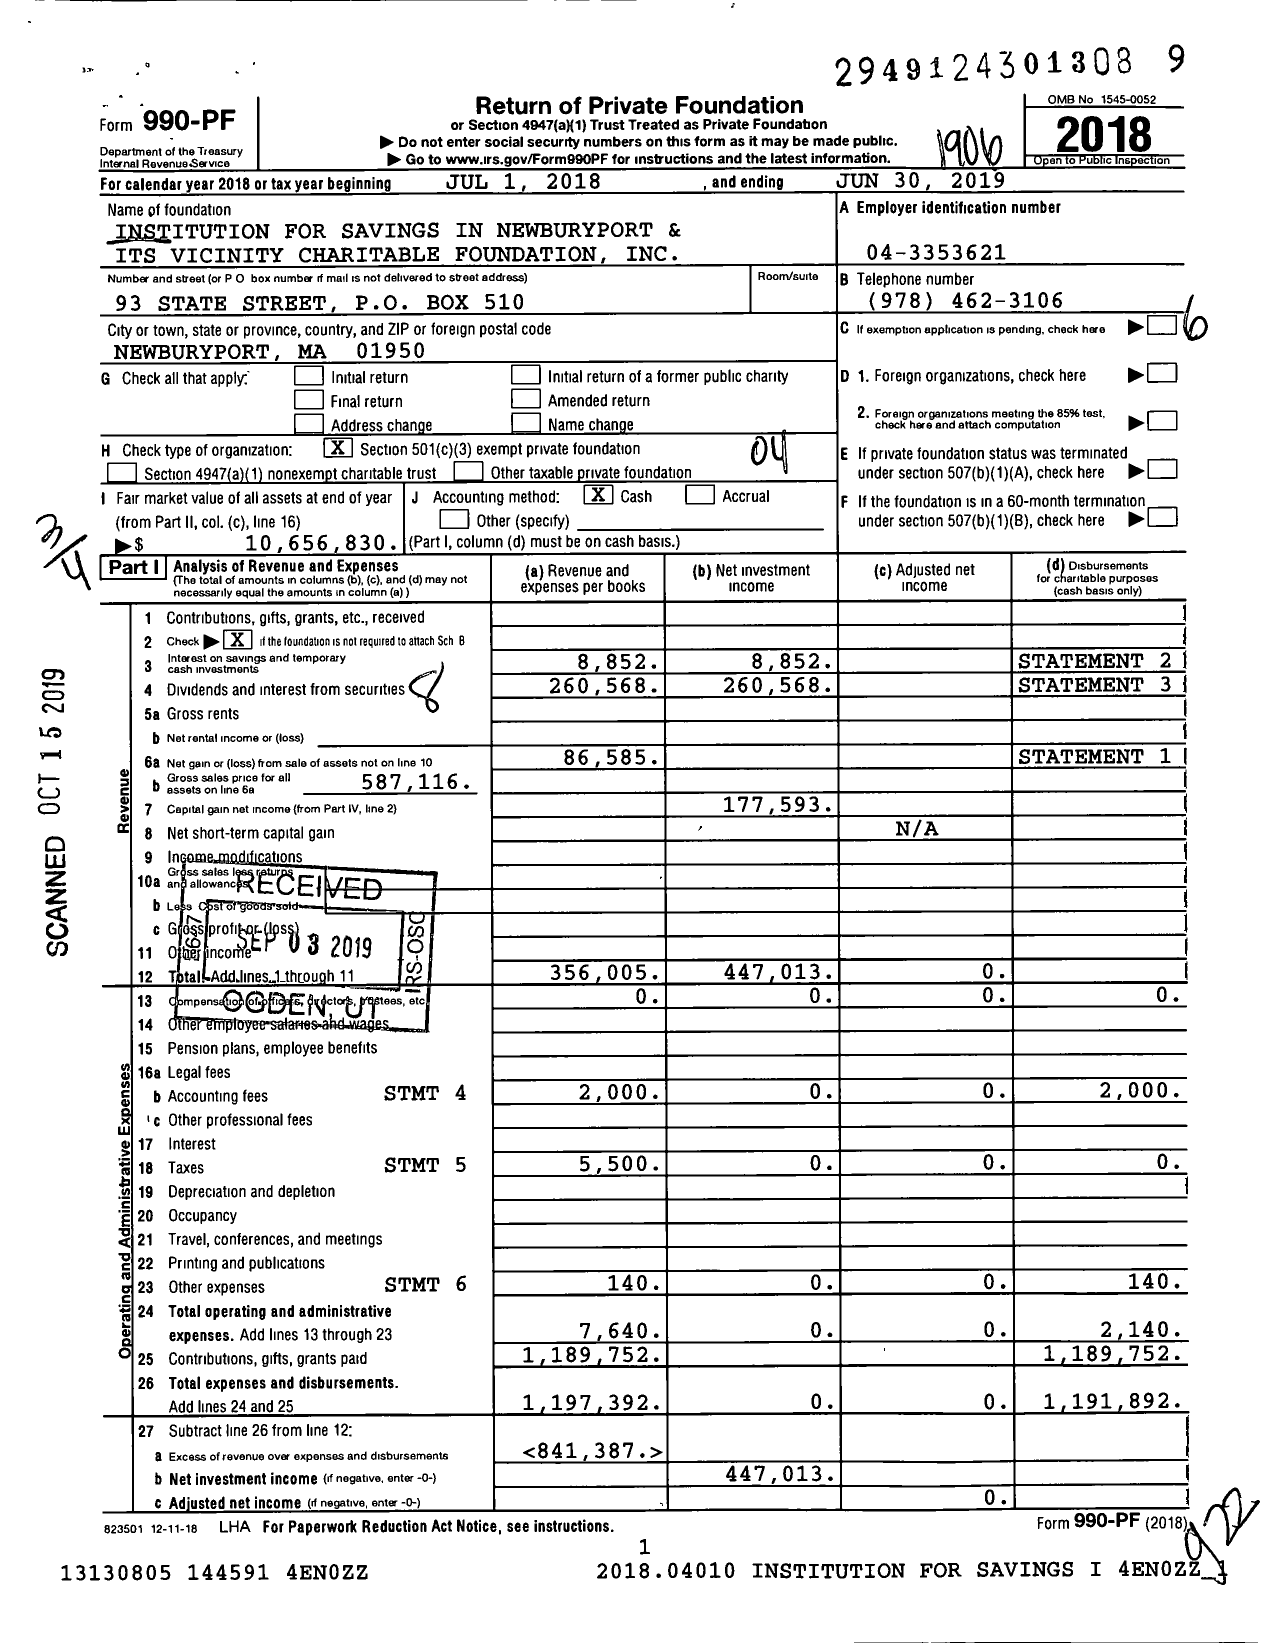 Image of first page of 2018 Form 990PF for Institution for Savings in Newburyport and Its Vicinity Charitable Foundation